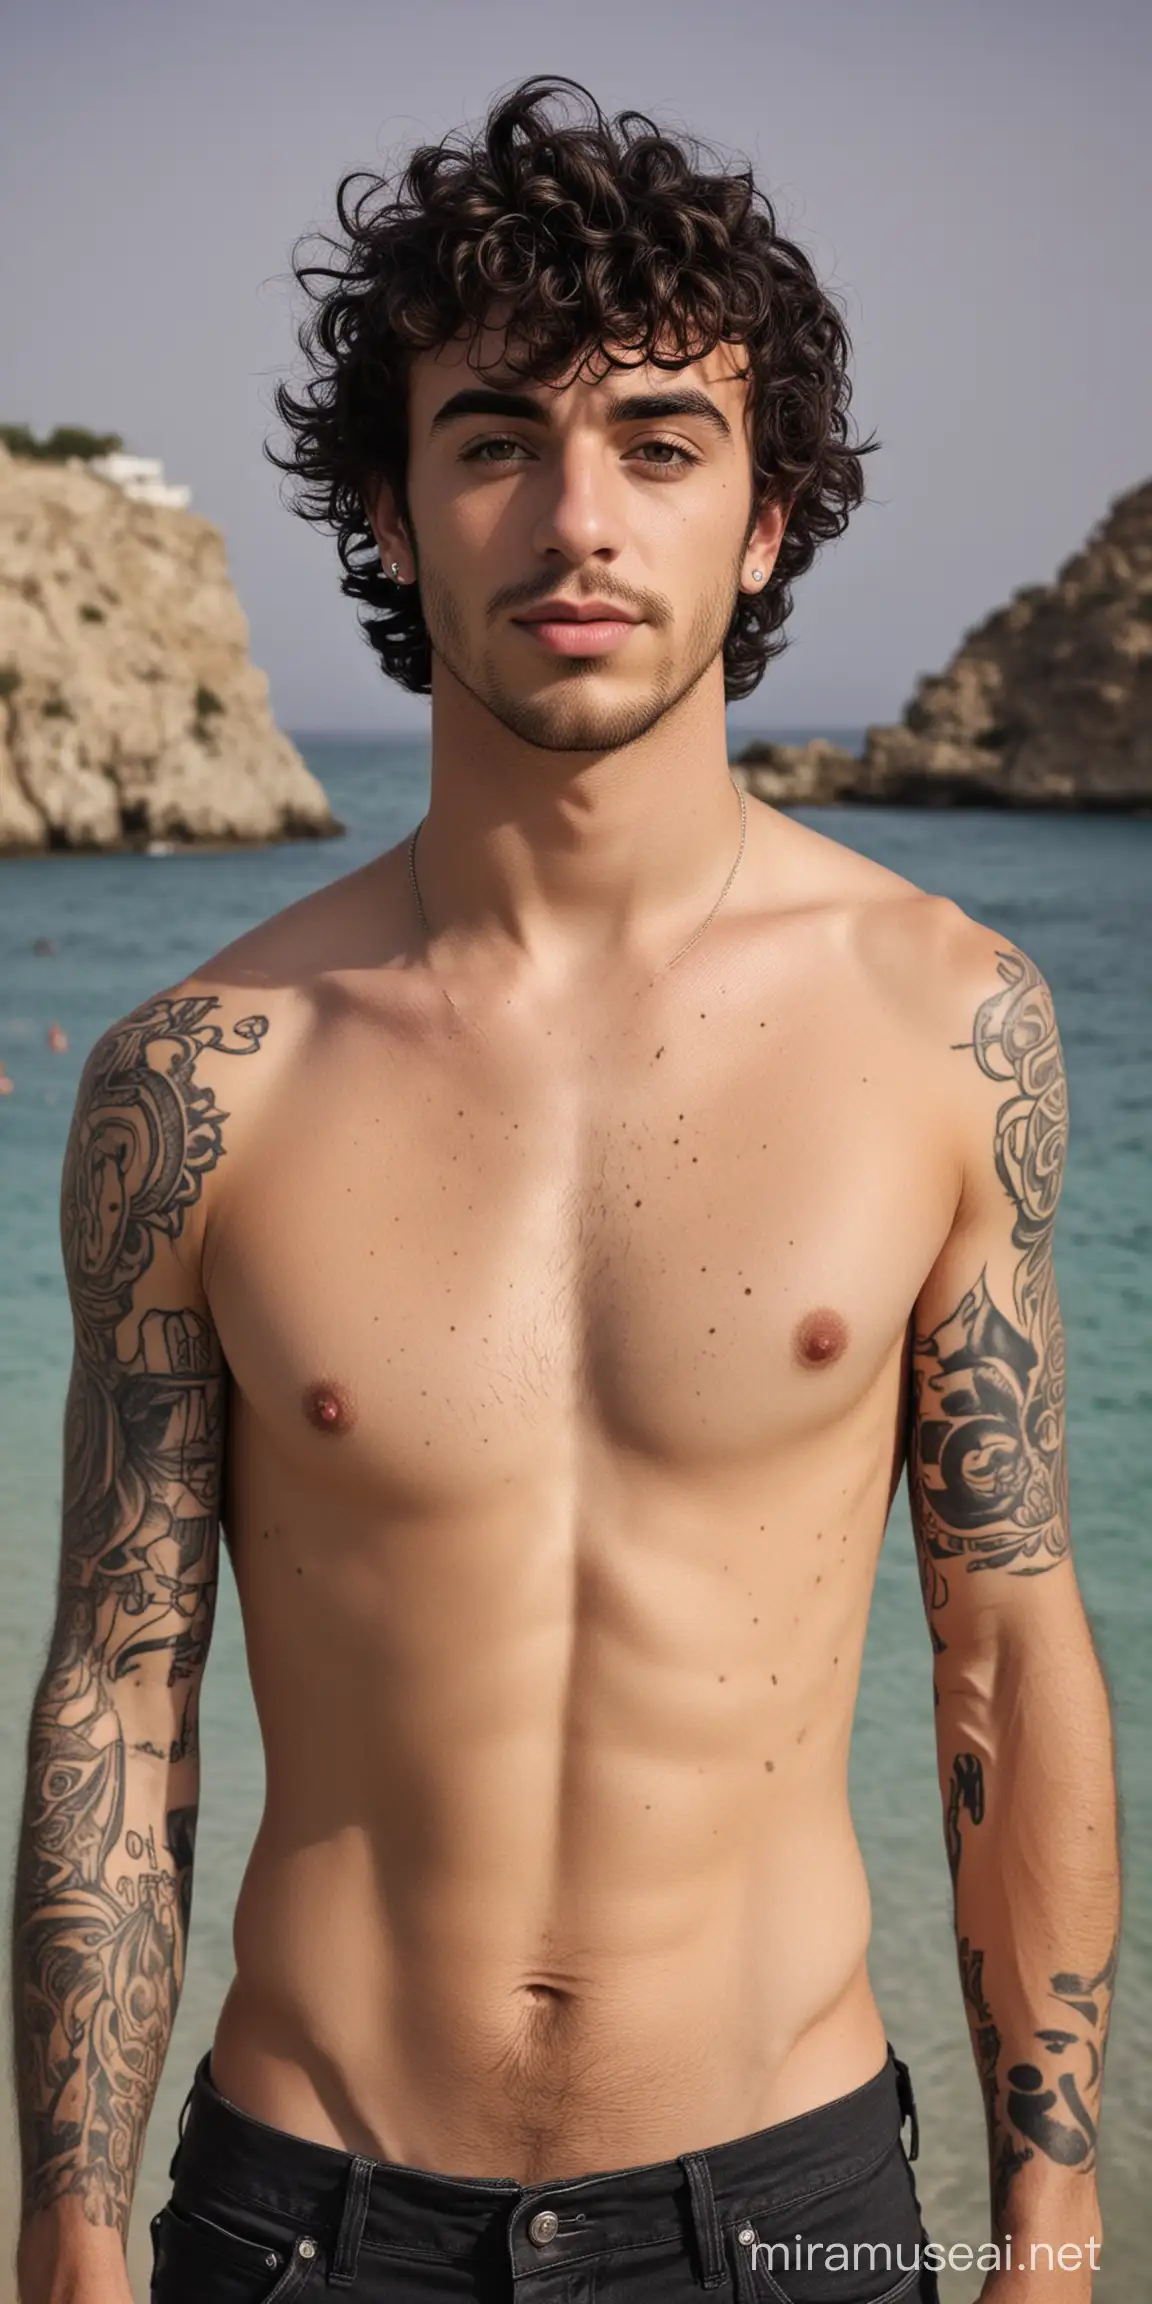 CurlyHaired Rock Star with Muscular Build on Greek Holiday with Tattoos